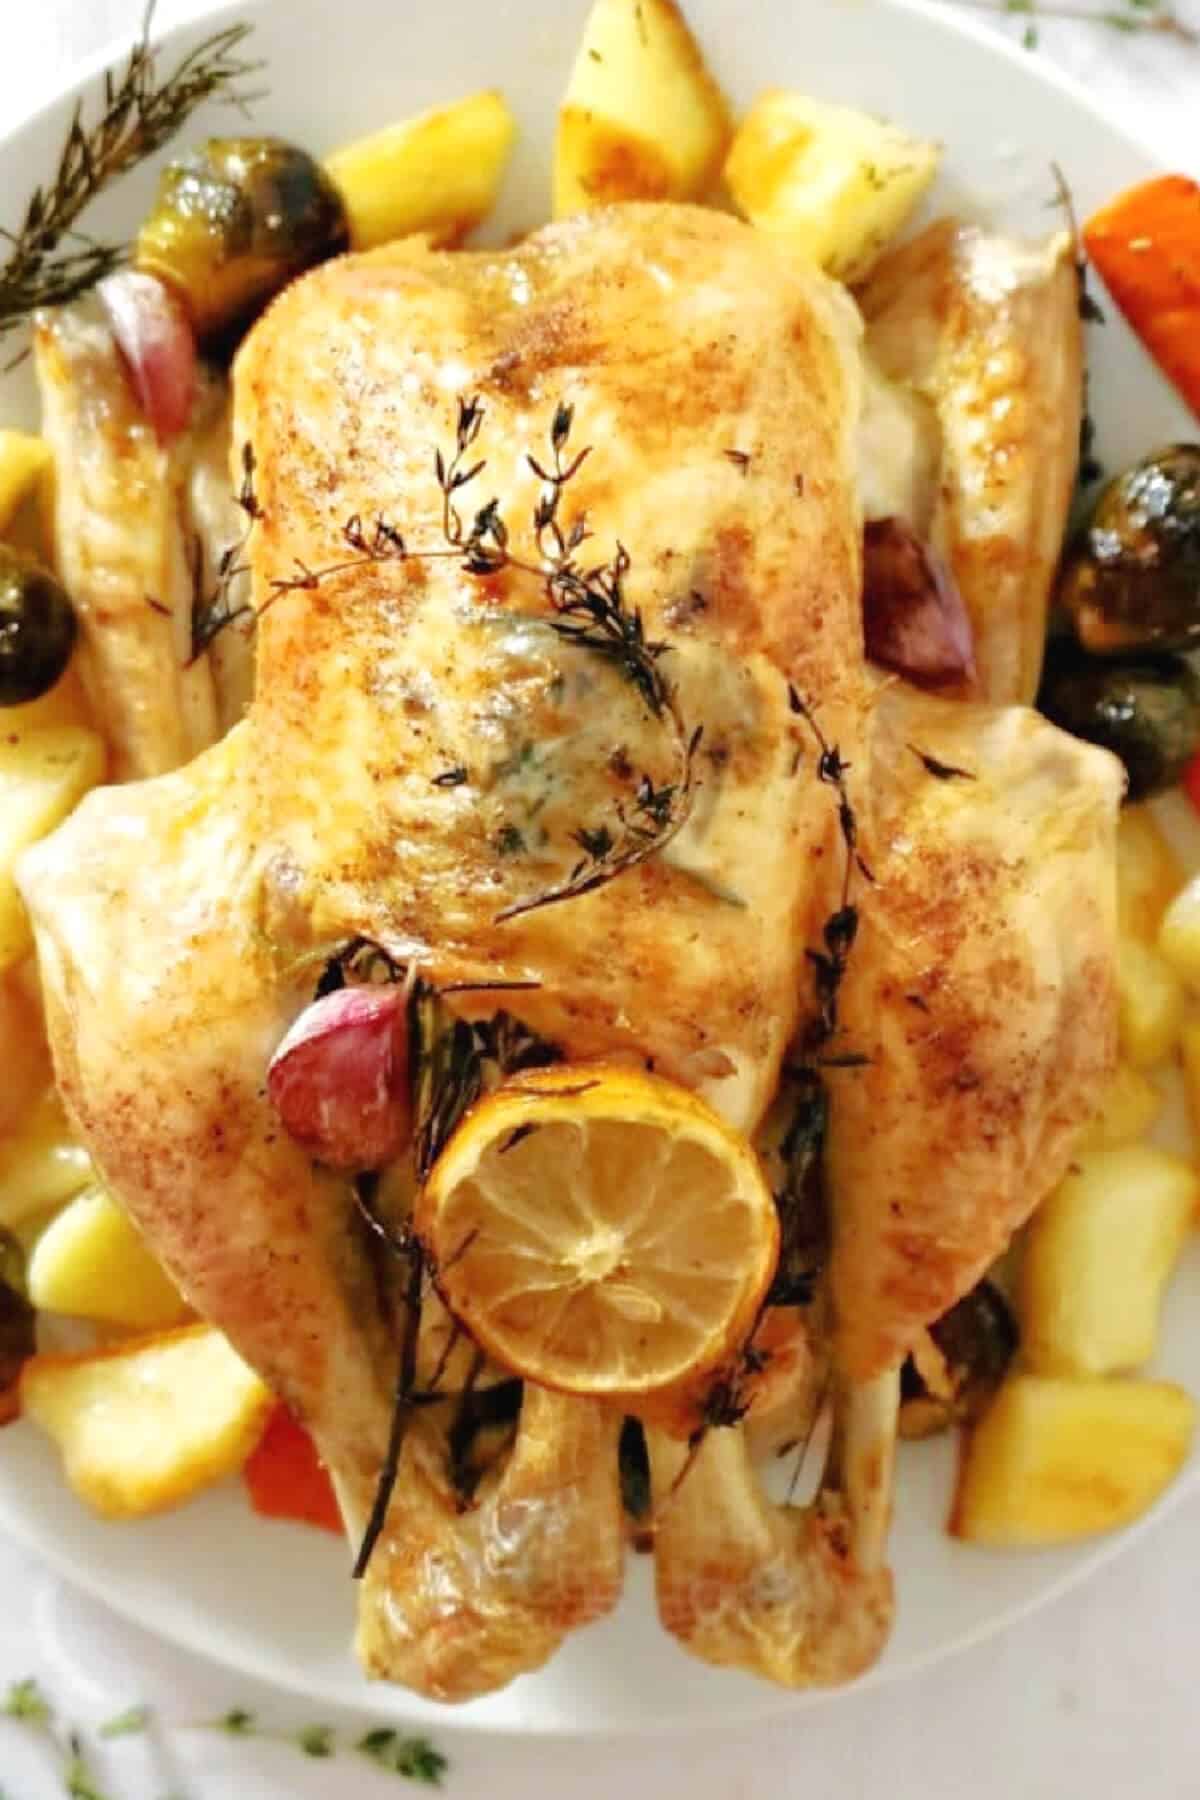 Close-up shoot of a whole roasted chicken with veggies around it.